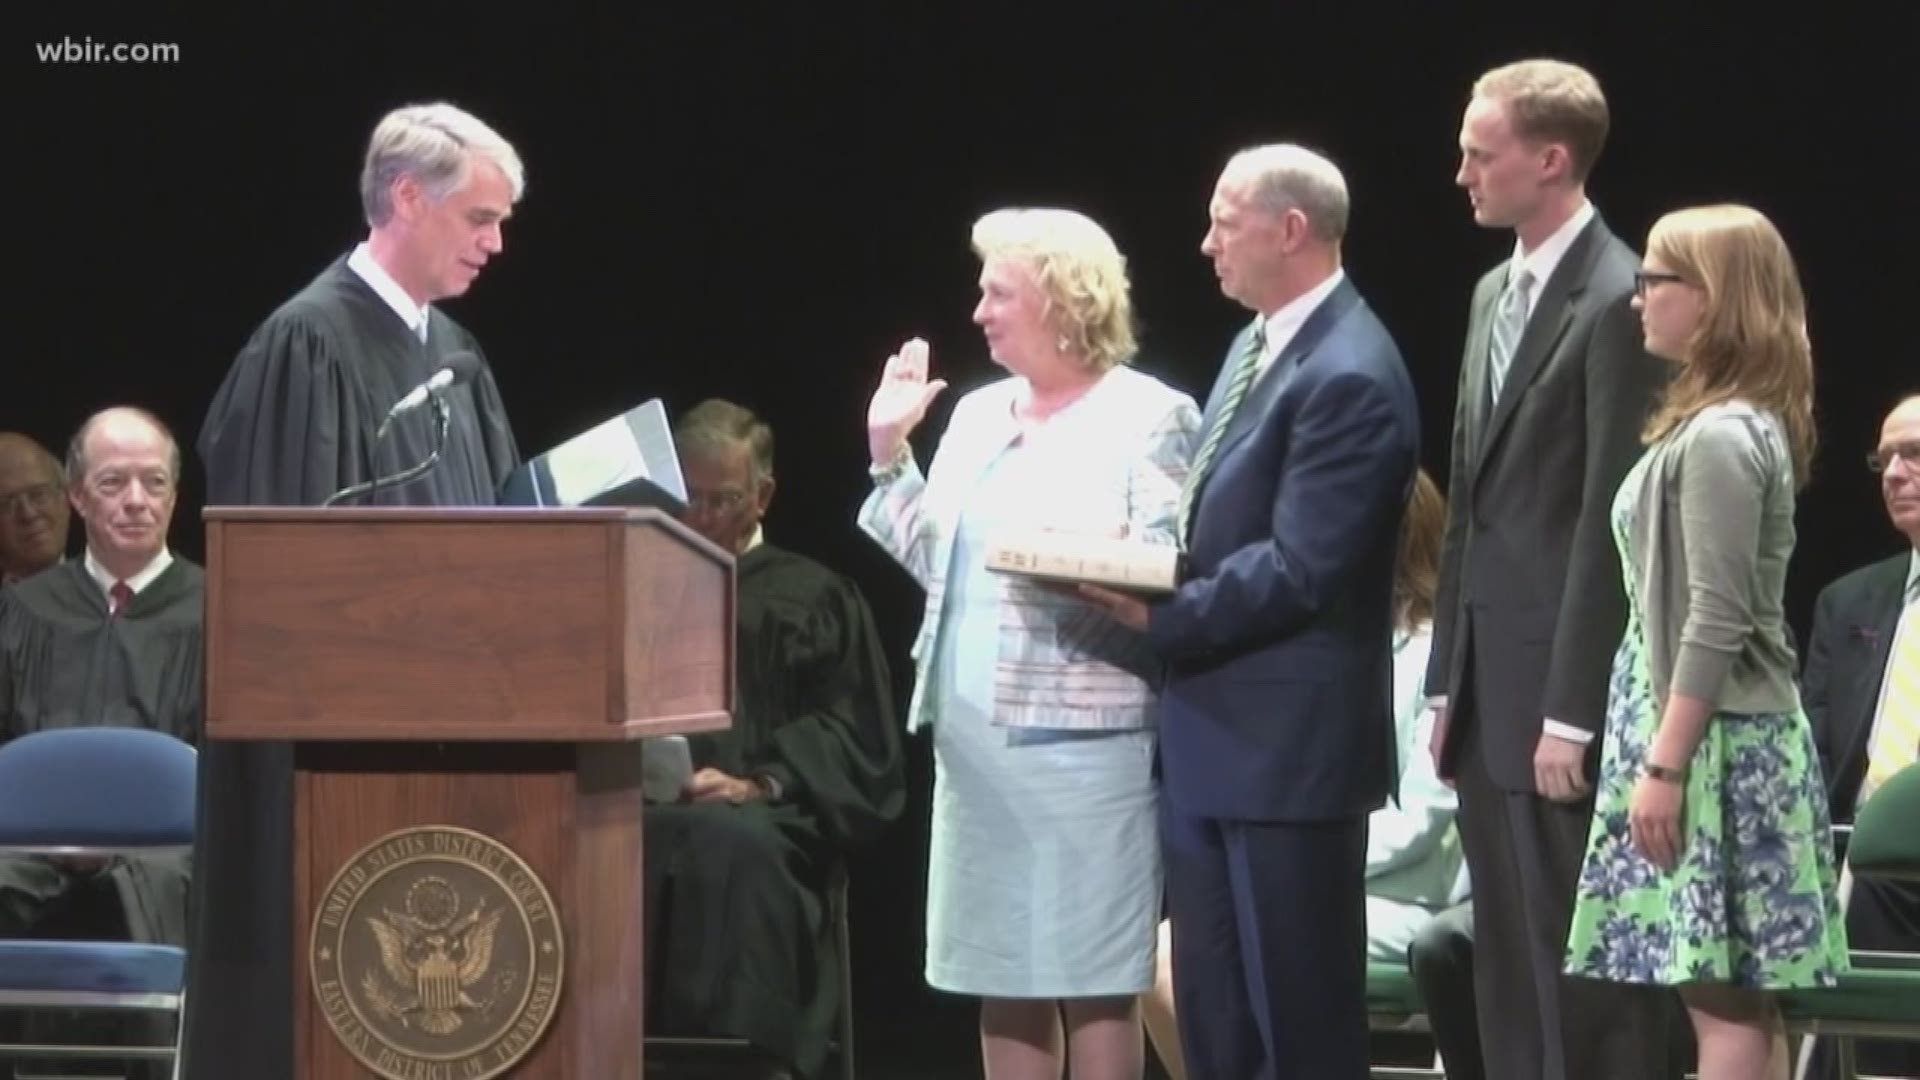 Pamela Reeves has officially been sworn in as East Tennessee's first female federal chief judge.